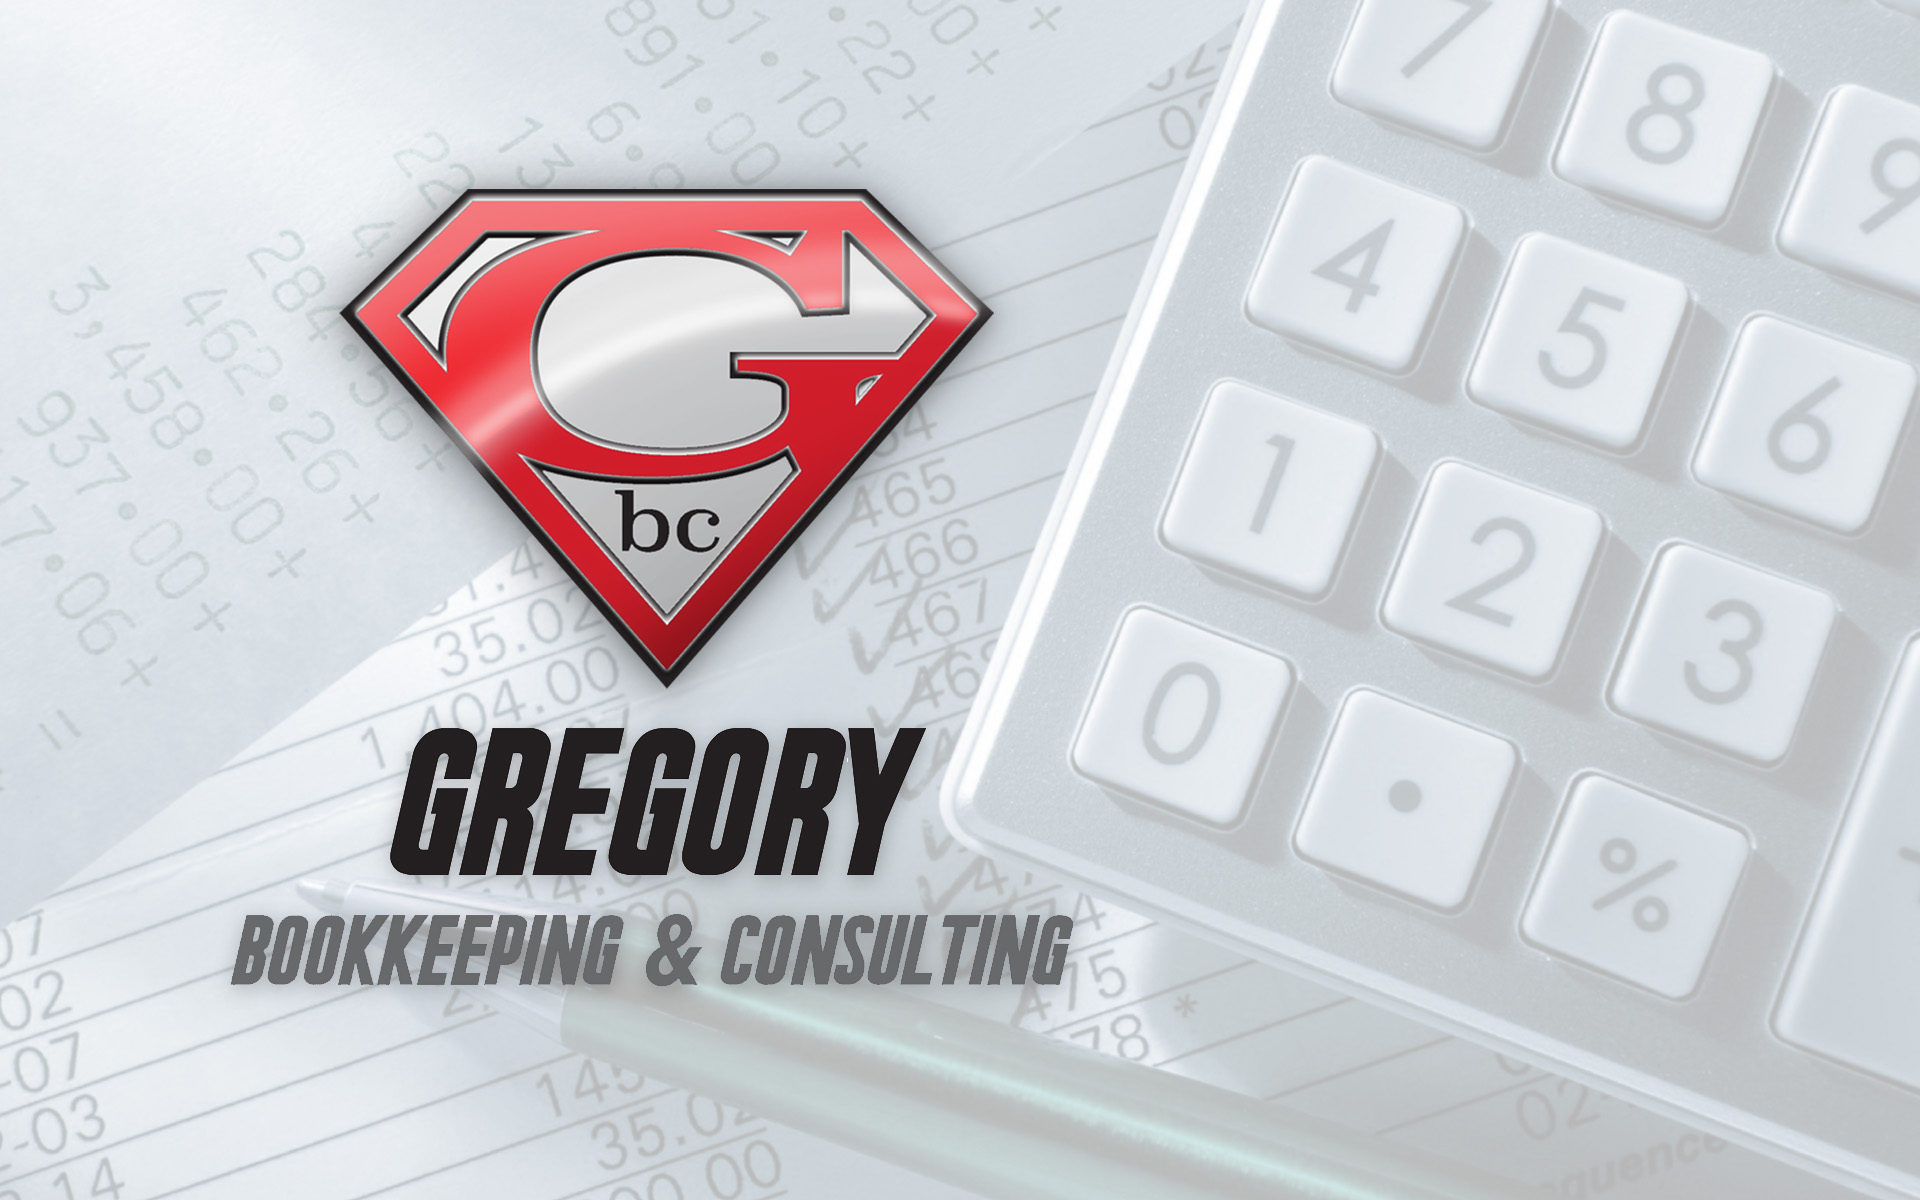 Graphic of Gregory Bookkeeping & Consulting logo and a calculator